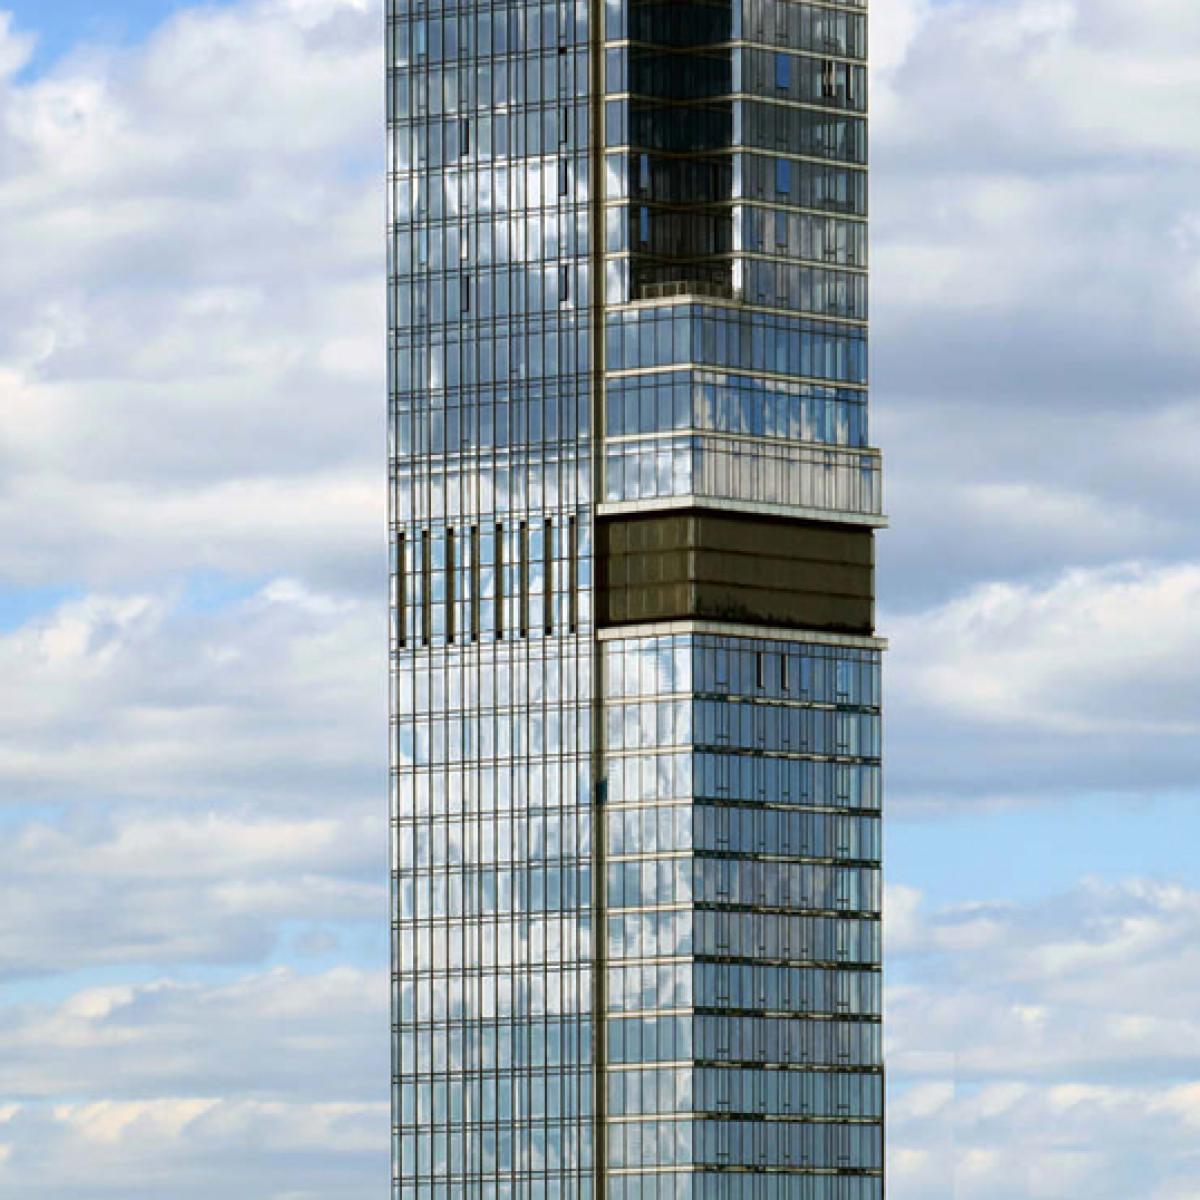 Nordstrom department store opens in world's tallest residential skyscraper